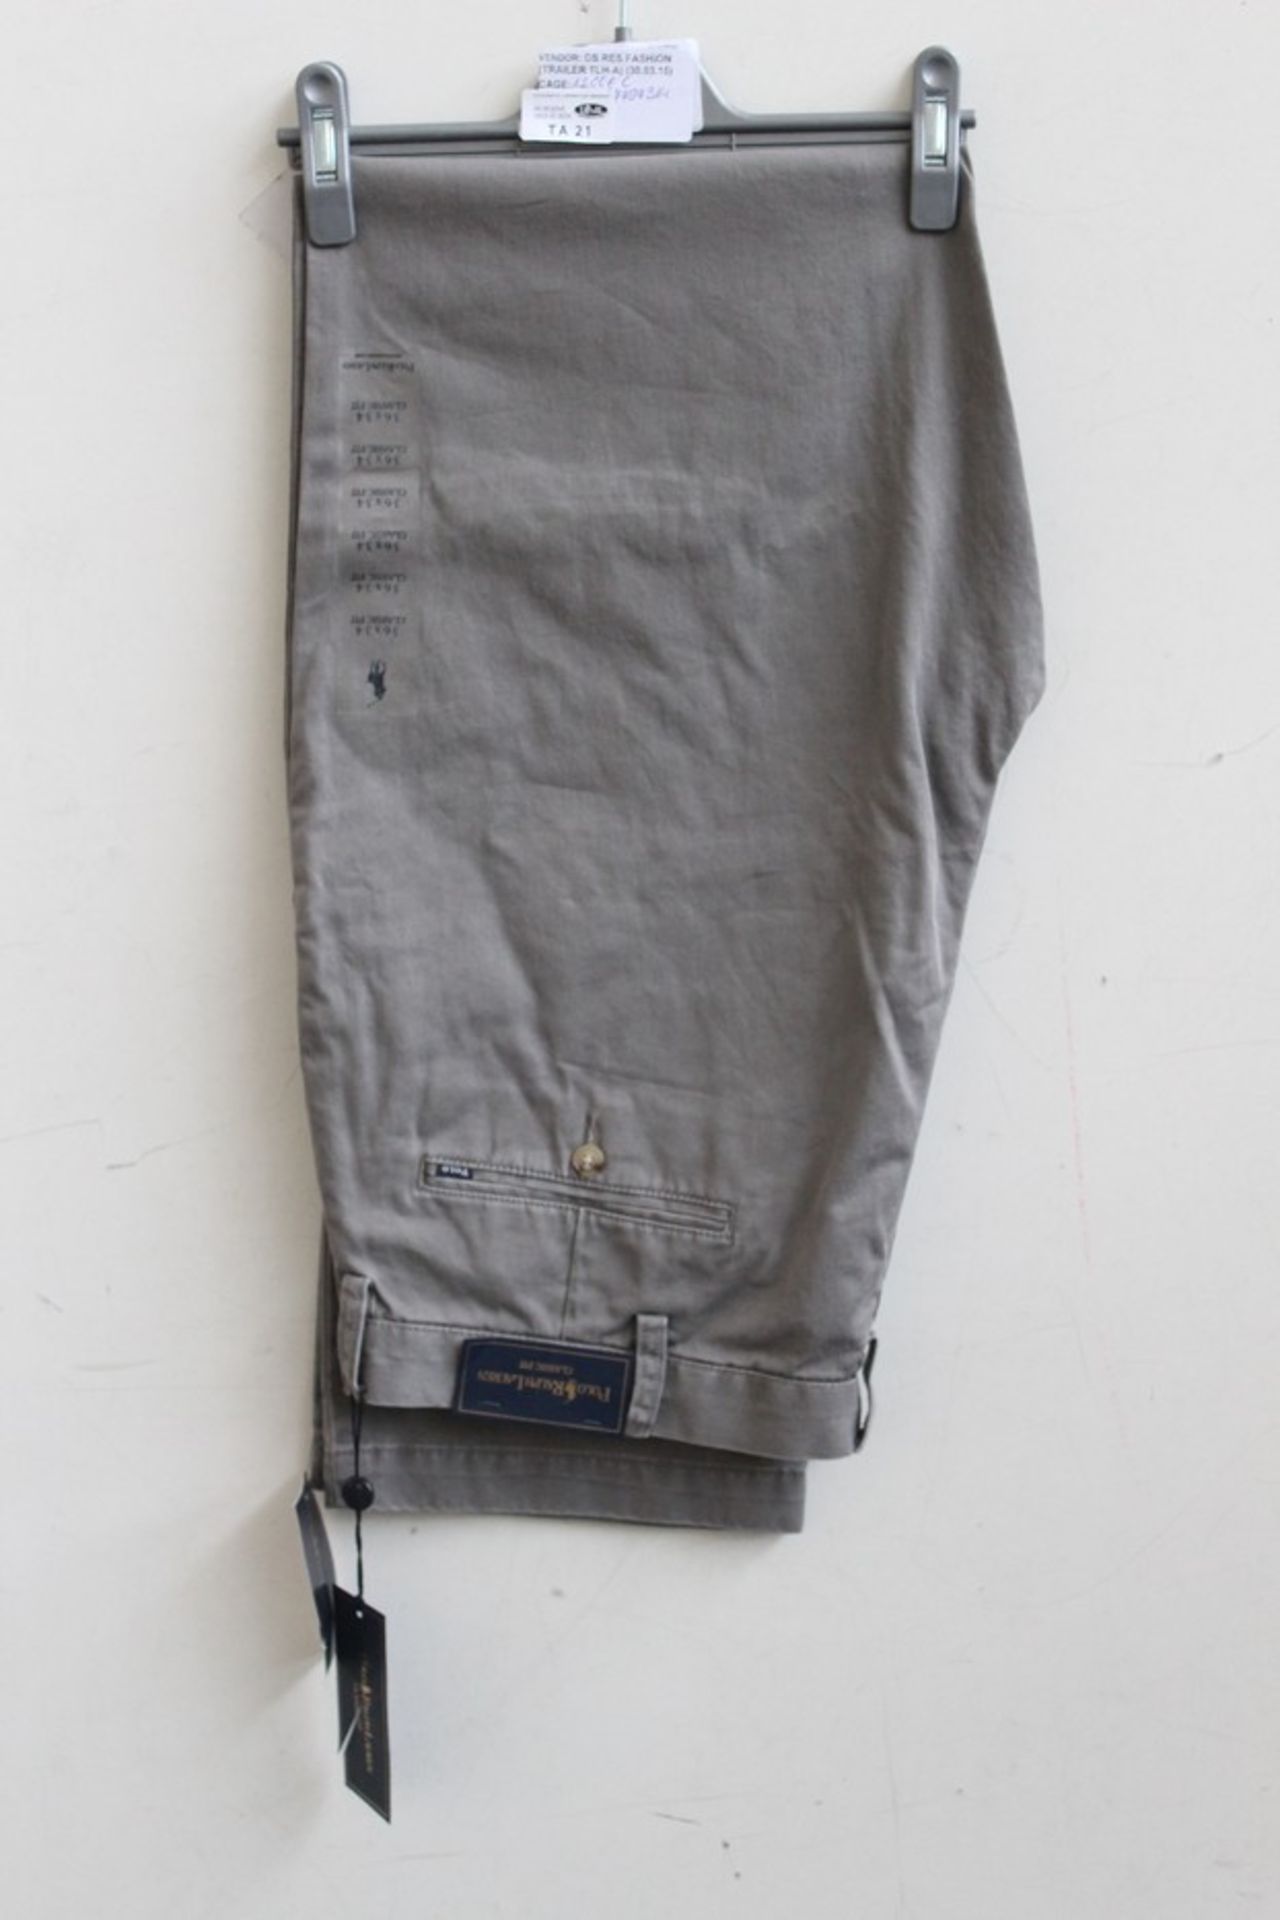 ONE BRAND NEW PAIR OF RALPH LAUREN GREENWICH CHINOS IN REAGAN GREY SIZE 34/32 RRP £100 (DS RES